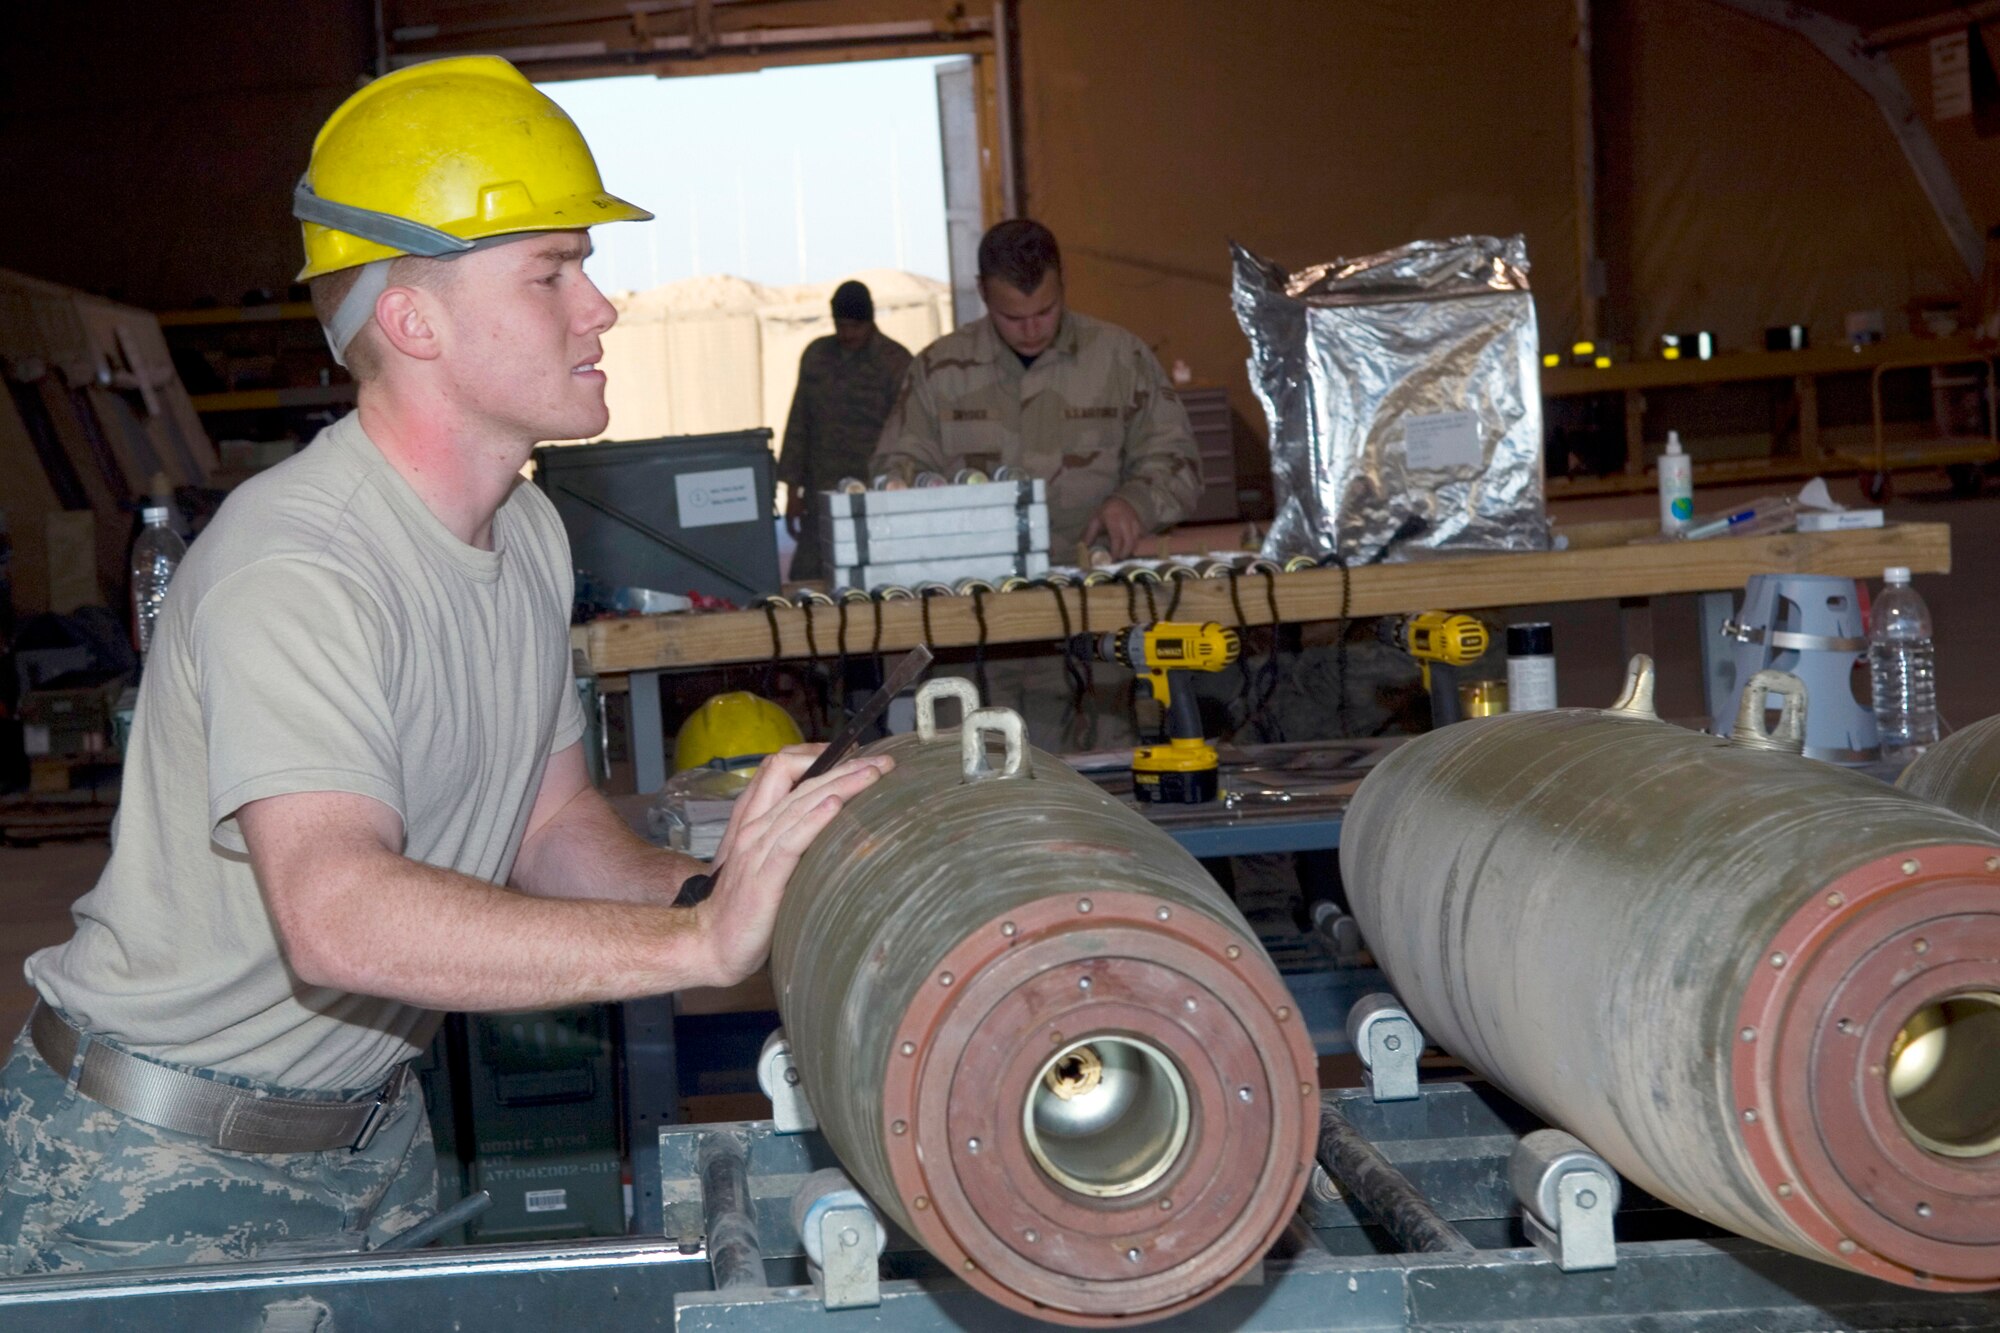 BALAD AIR BASE, Iraq -- Airman 1st Class Justin Porter, 332nd Expeditionary Maintenance Squadron Ammunitions Flight conventional maintenance crew member, pushes a 500-pound MK-82 bomb down the Munitions Assembly Conveyor for build-up. Airman Porter is deployed from Spangdahlem Air Base, Germany. (U.S. Air Force photo/ Staff Sgt. Travis Edwards)